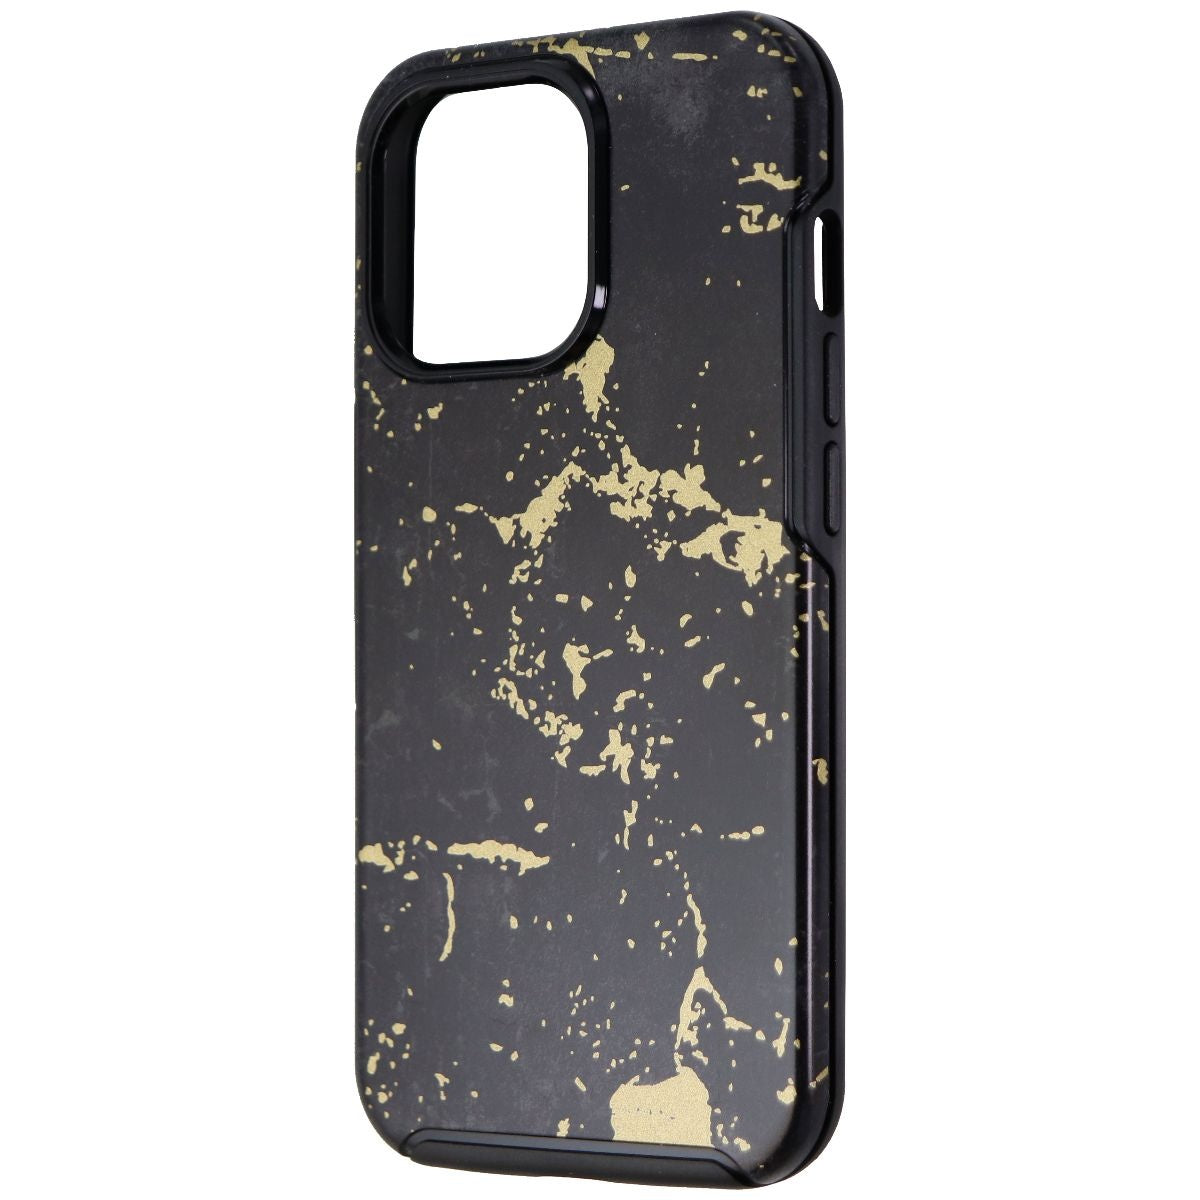 OtterBox Symmetry Case for Apple iPhone 13 Pro - Enigma Graphic (Black/Gold)